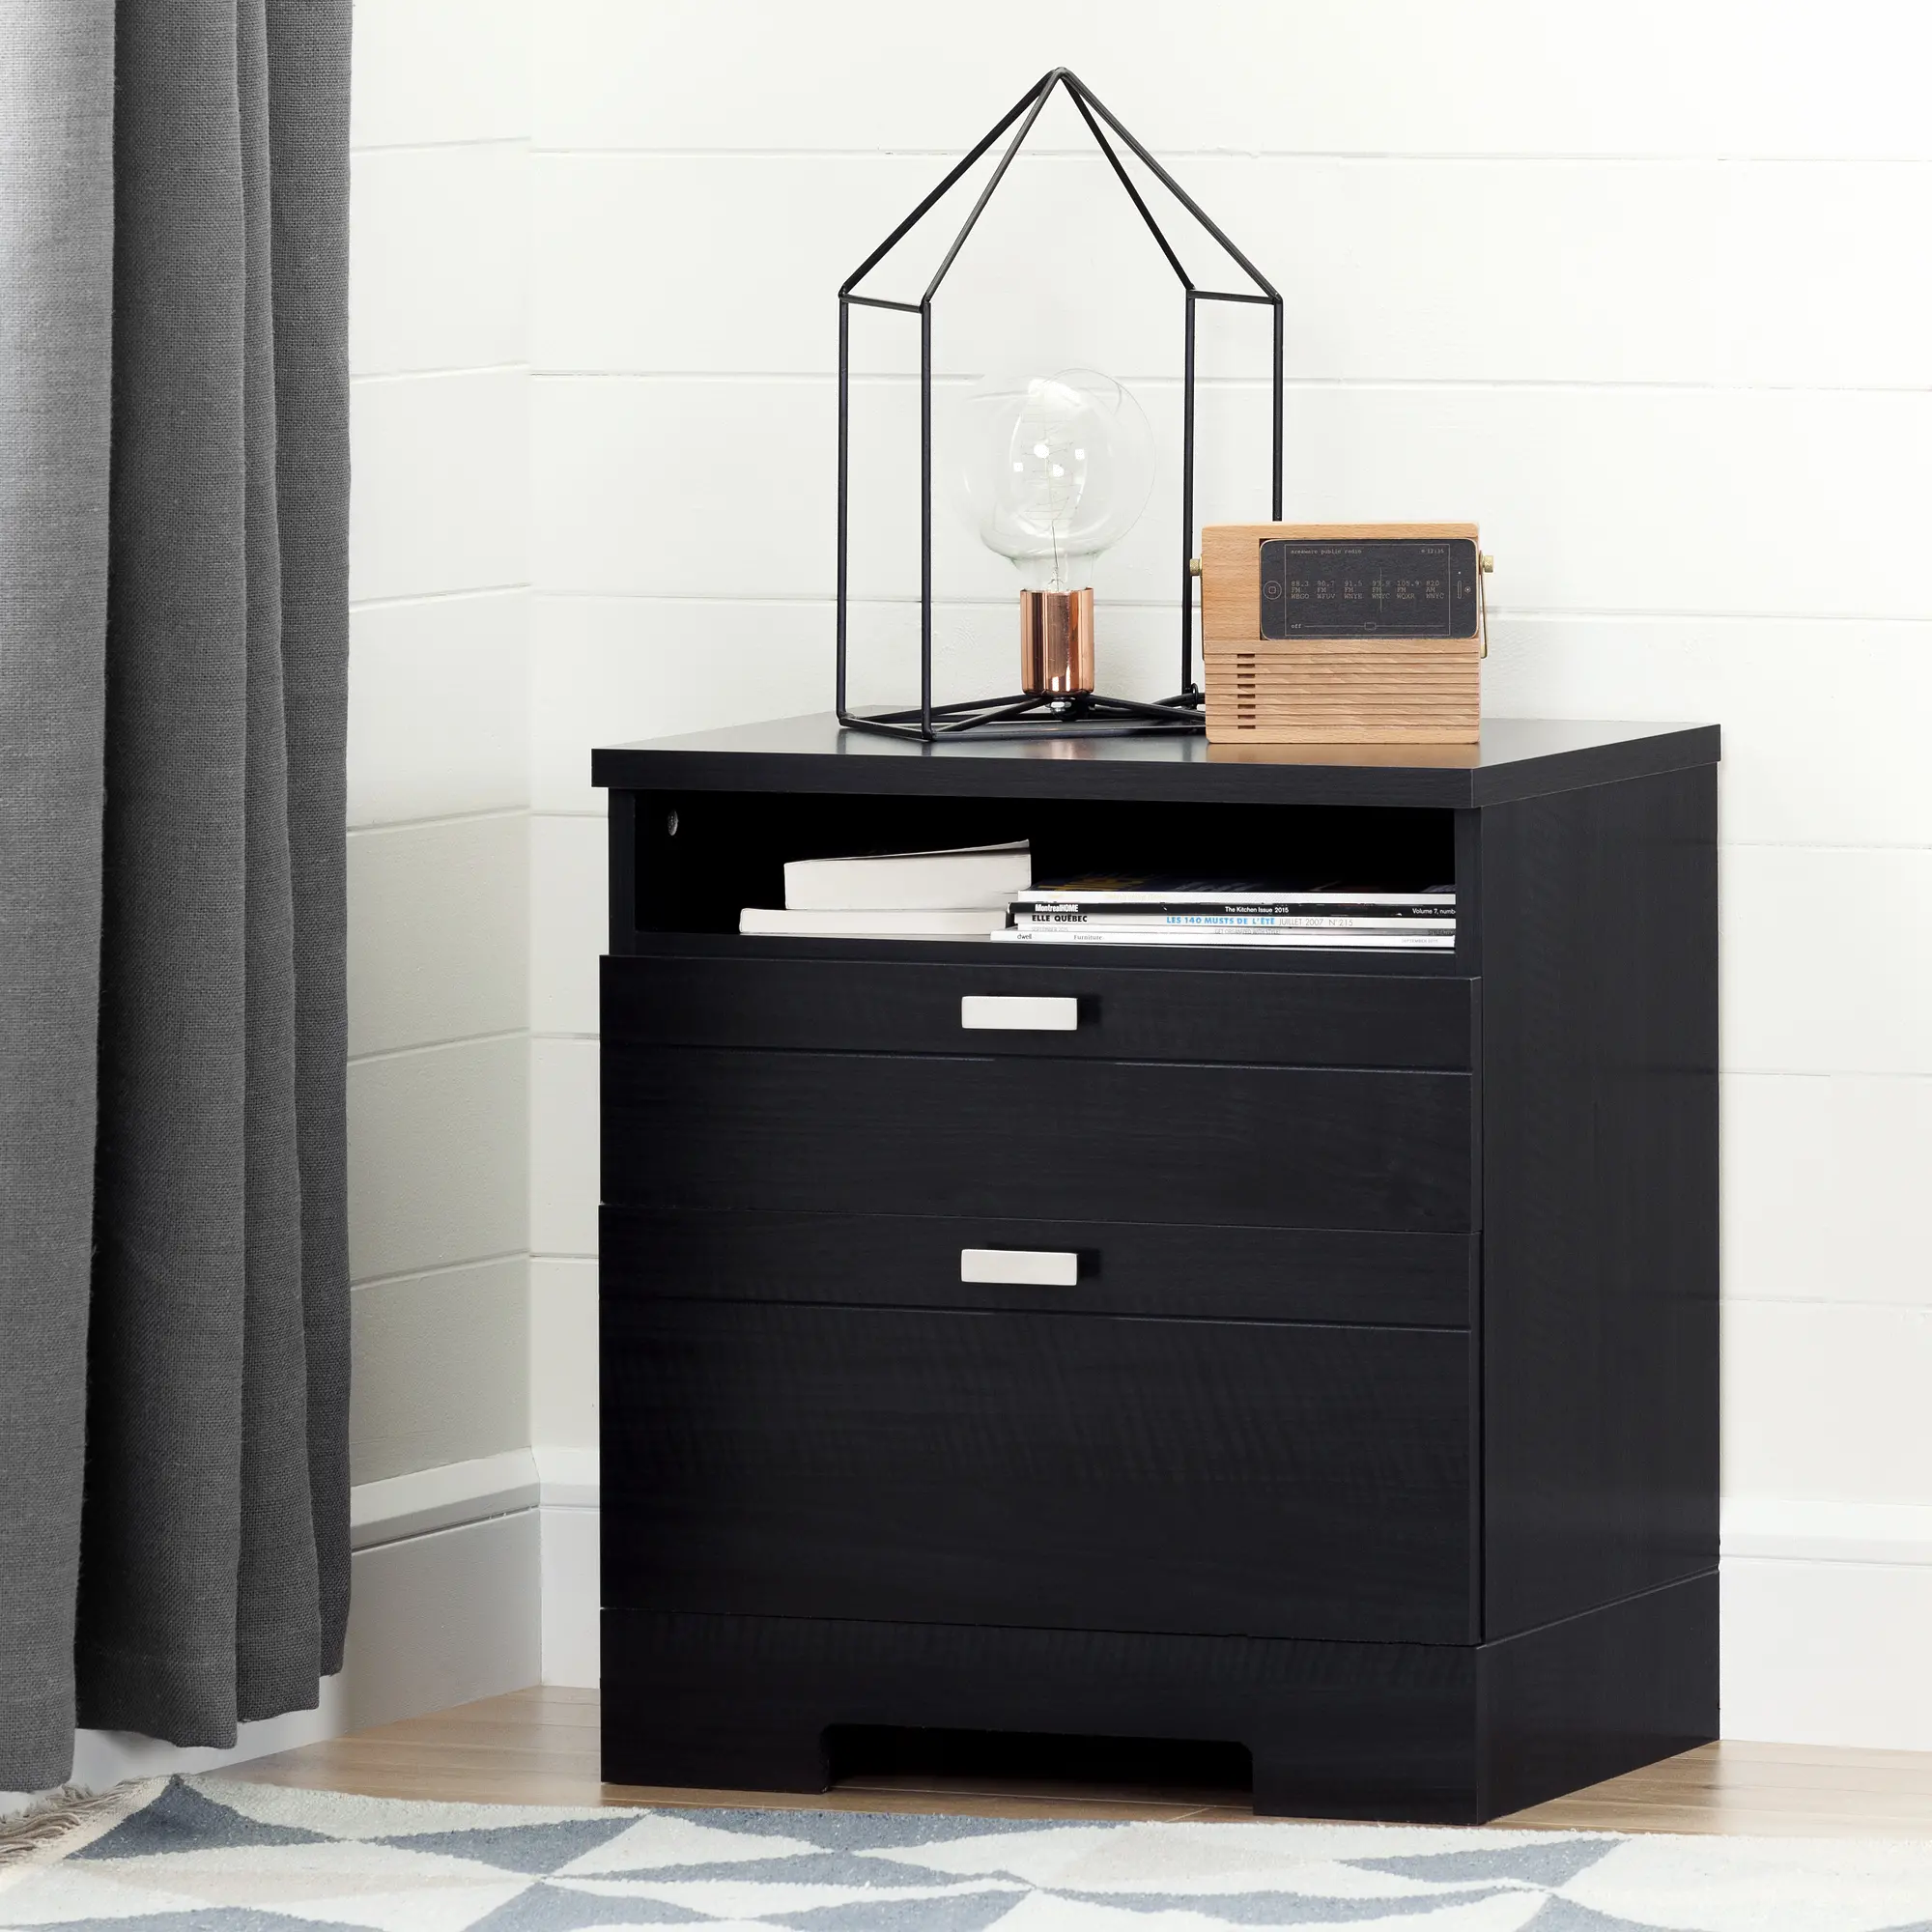 Reevo Black Nightstand with Drawers and Cord Catcher - South Shore